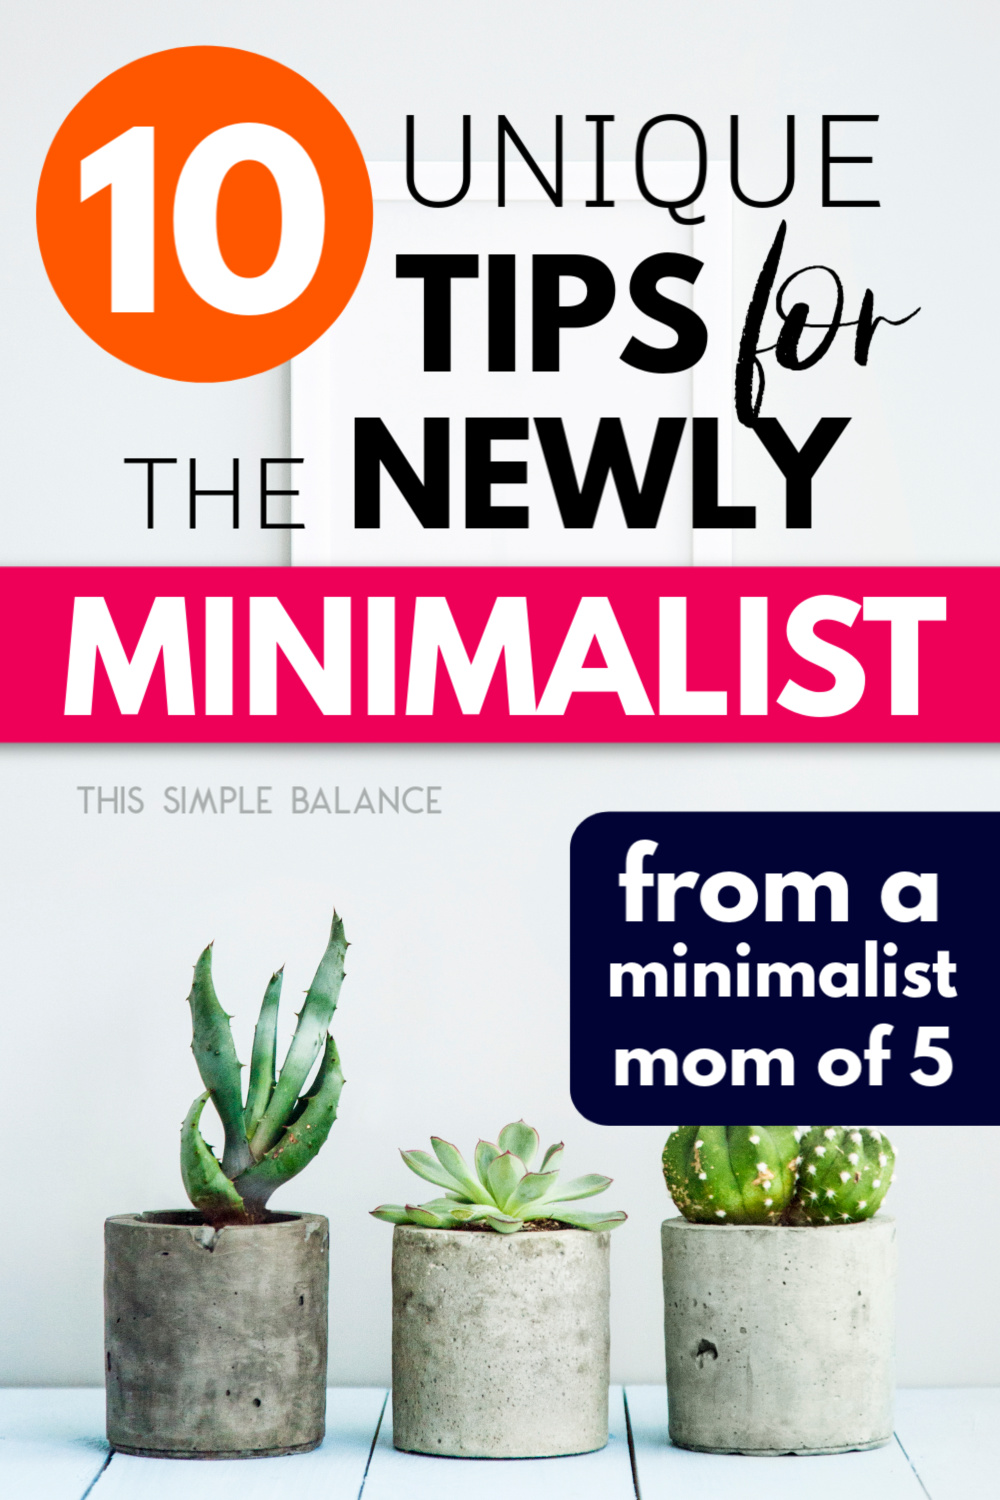 three succulents in concrete planter pots with text overlay, "10 unique tips for the newly minimalist from a minimalist mom of 5"